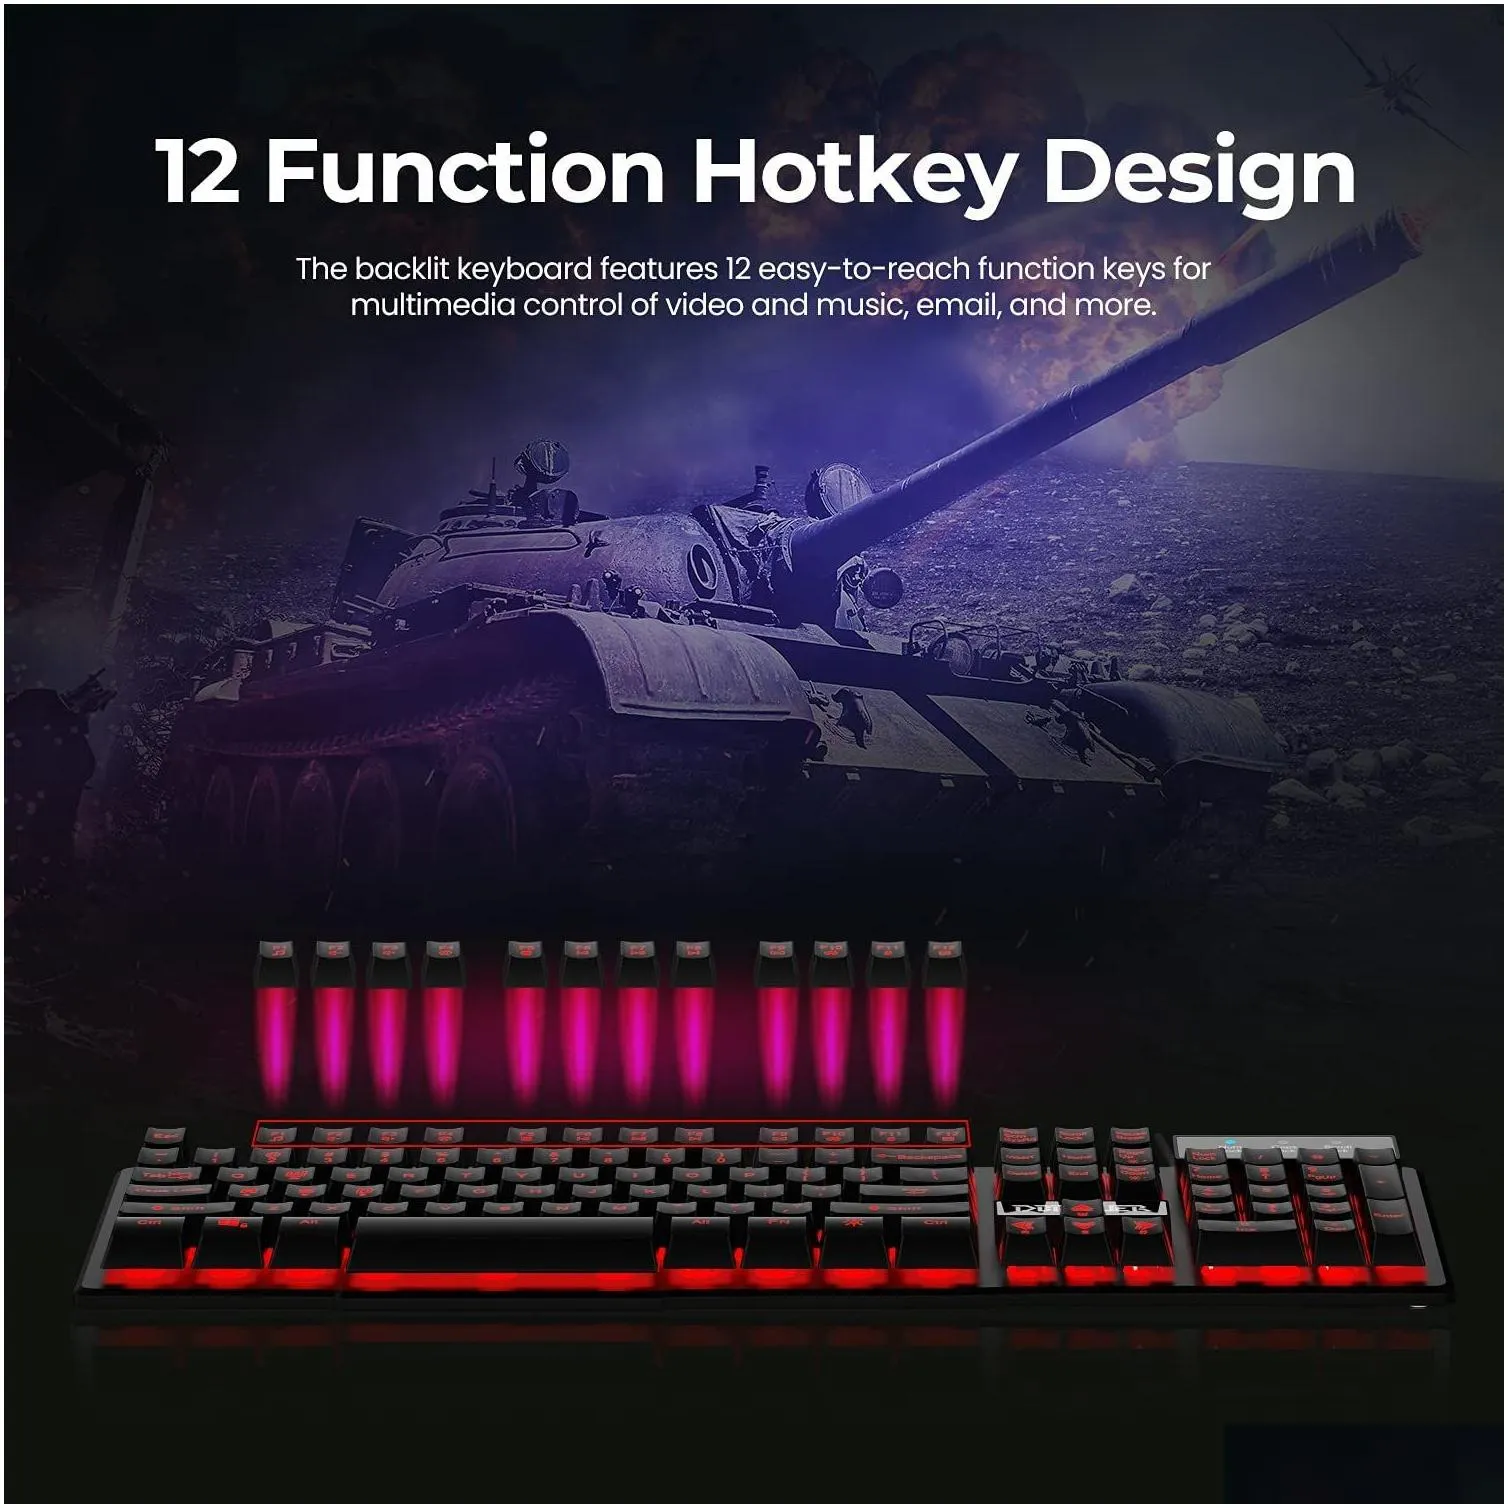 dbpower gaming office 2 in 1 keyboard with 3 colors led backlighting ergonomic mechanical feel 104 key gaming keyboard office equipment for pc laptops